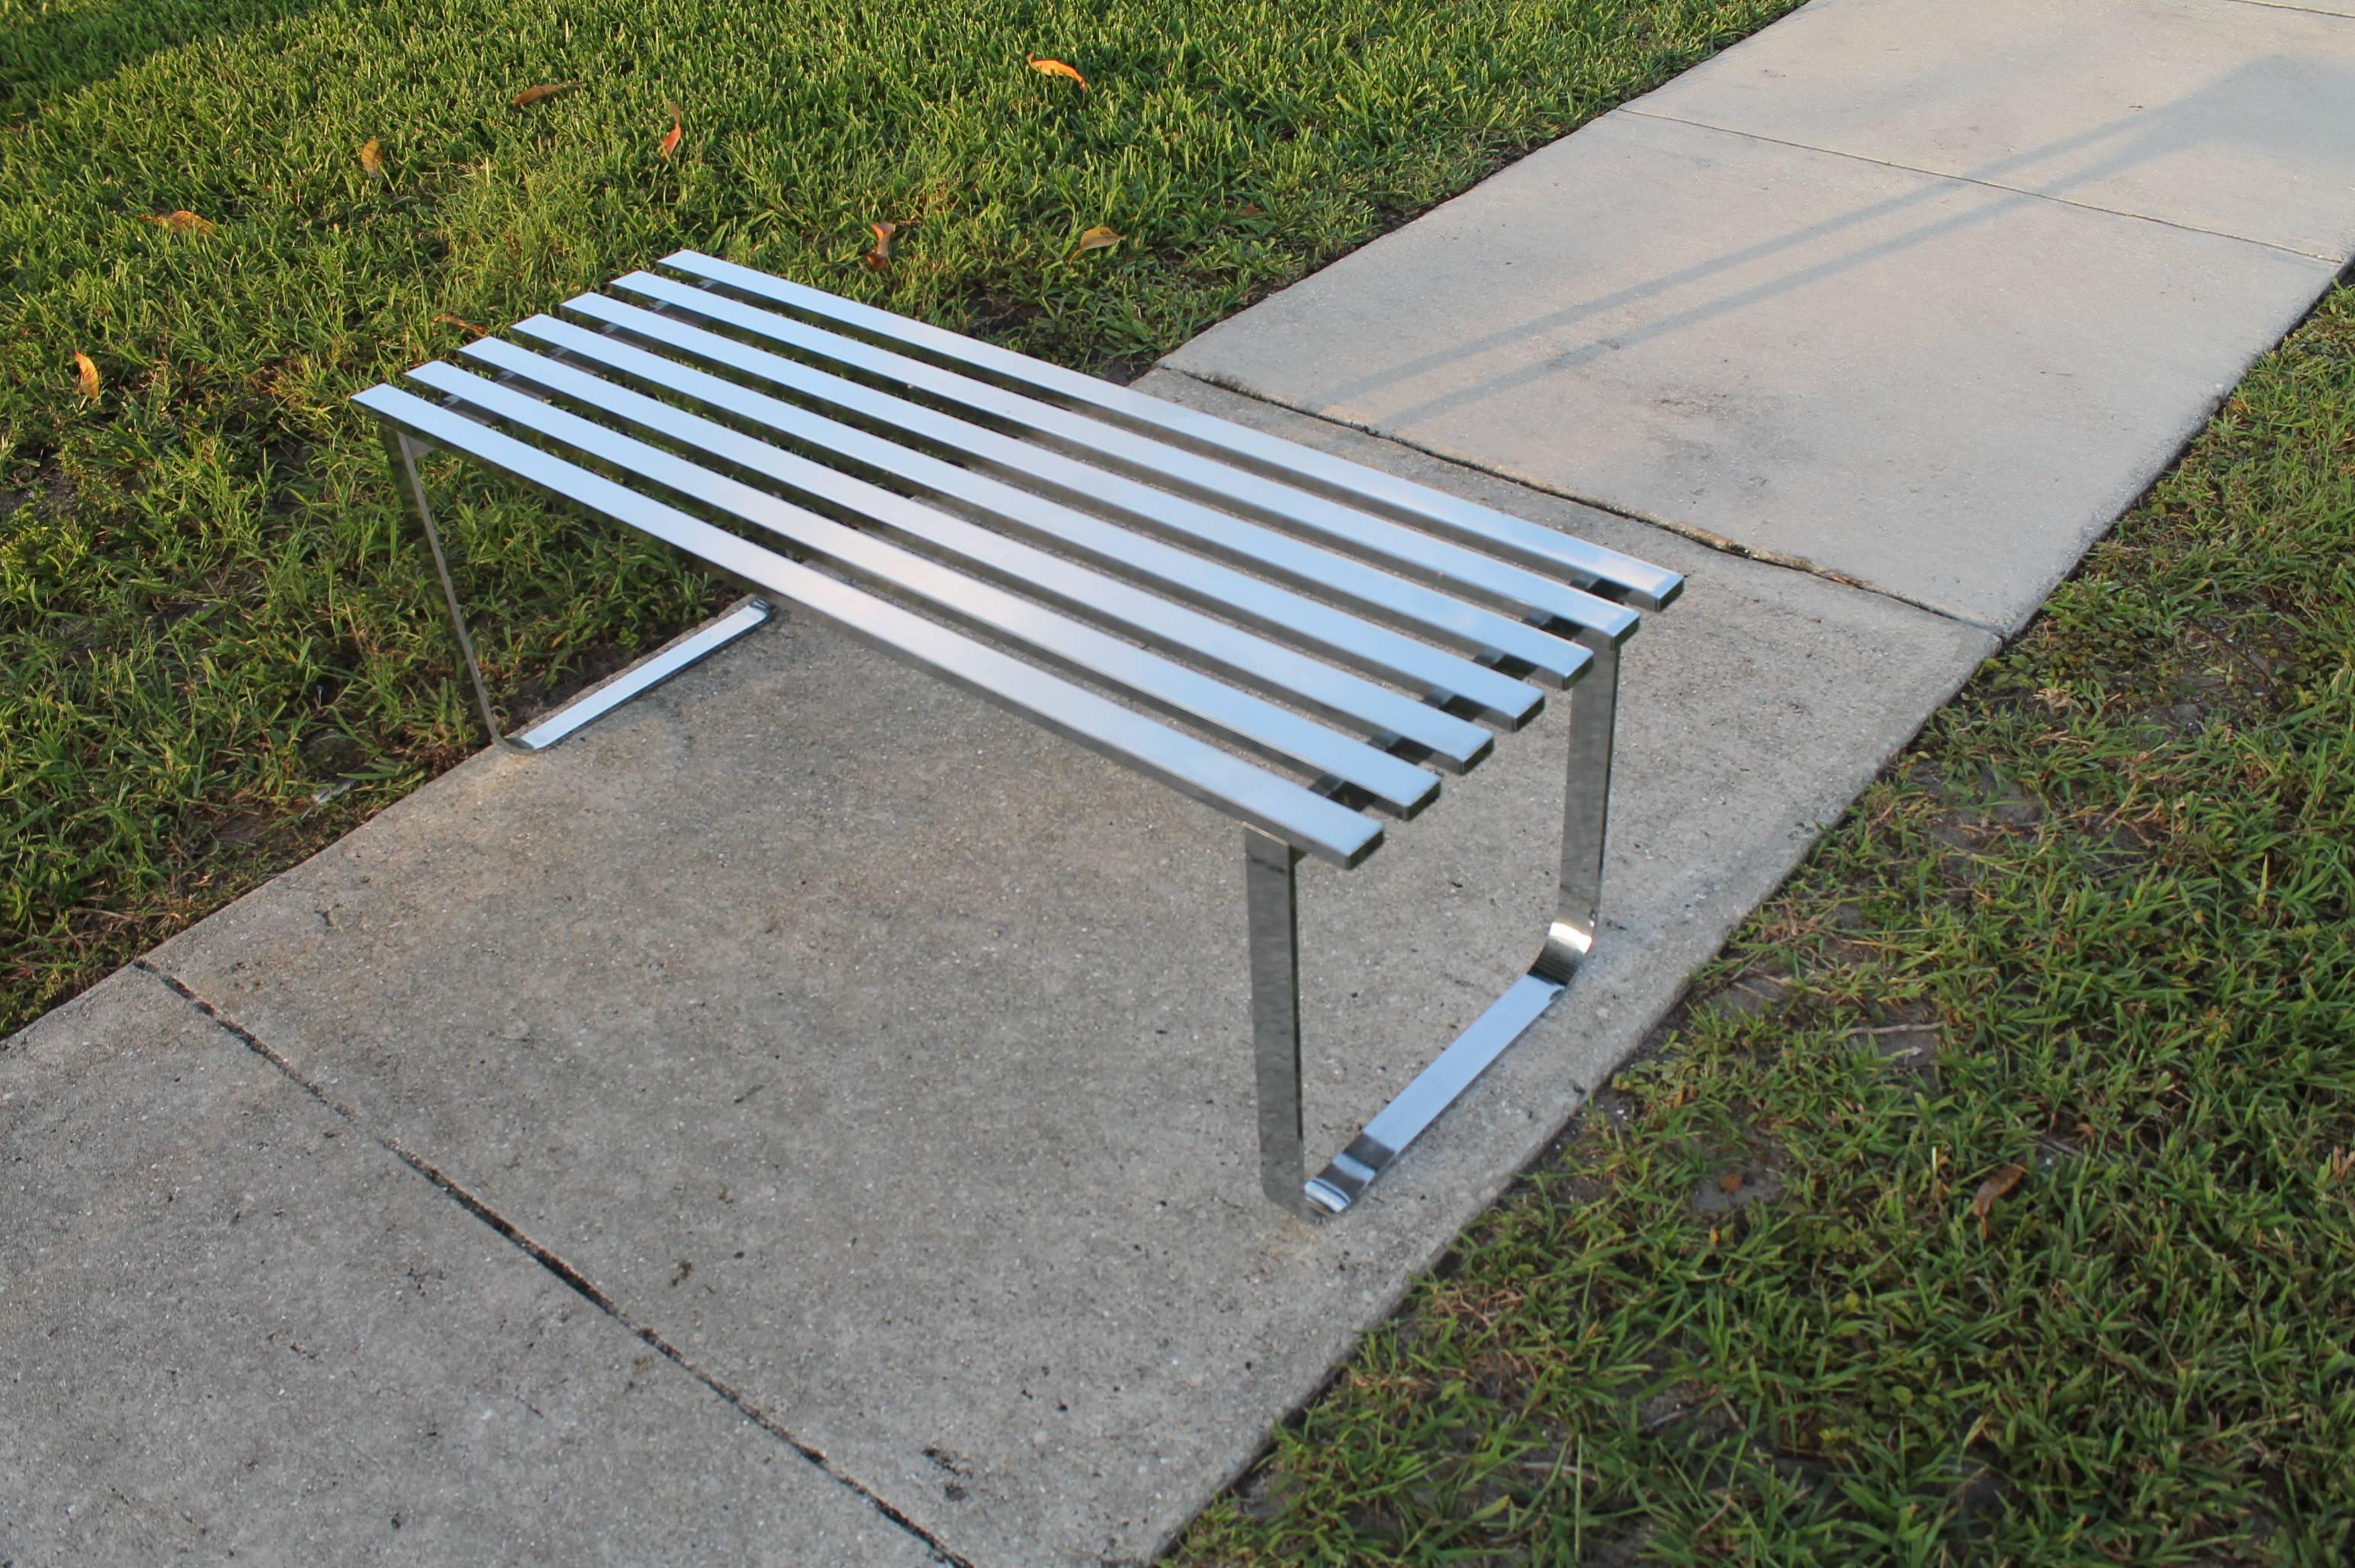 American Vintage DIA Design Institute of America Chrome Slat Bench or Coffee Table, Stele